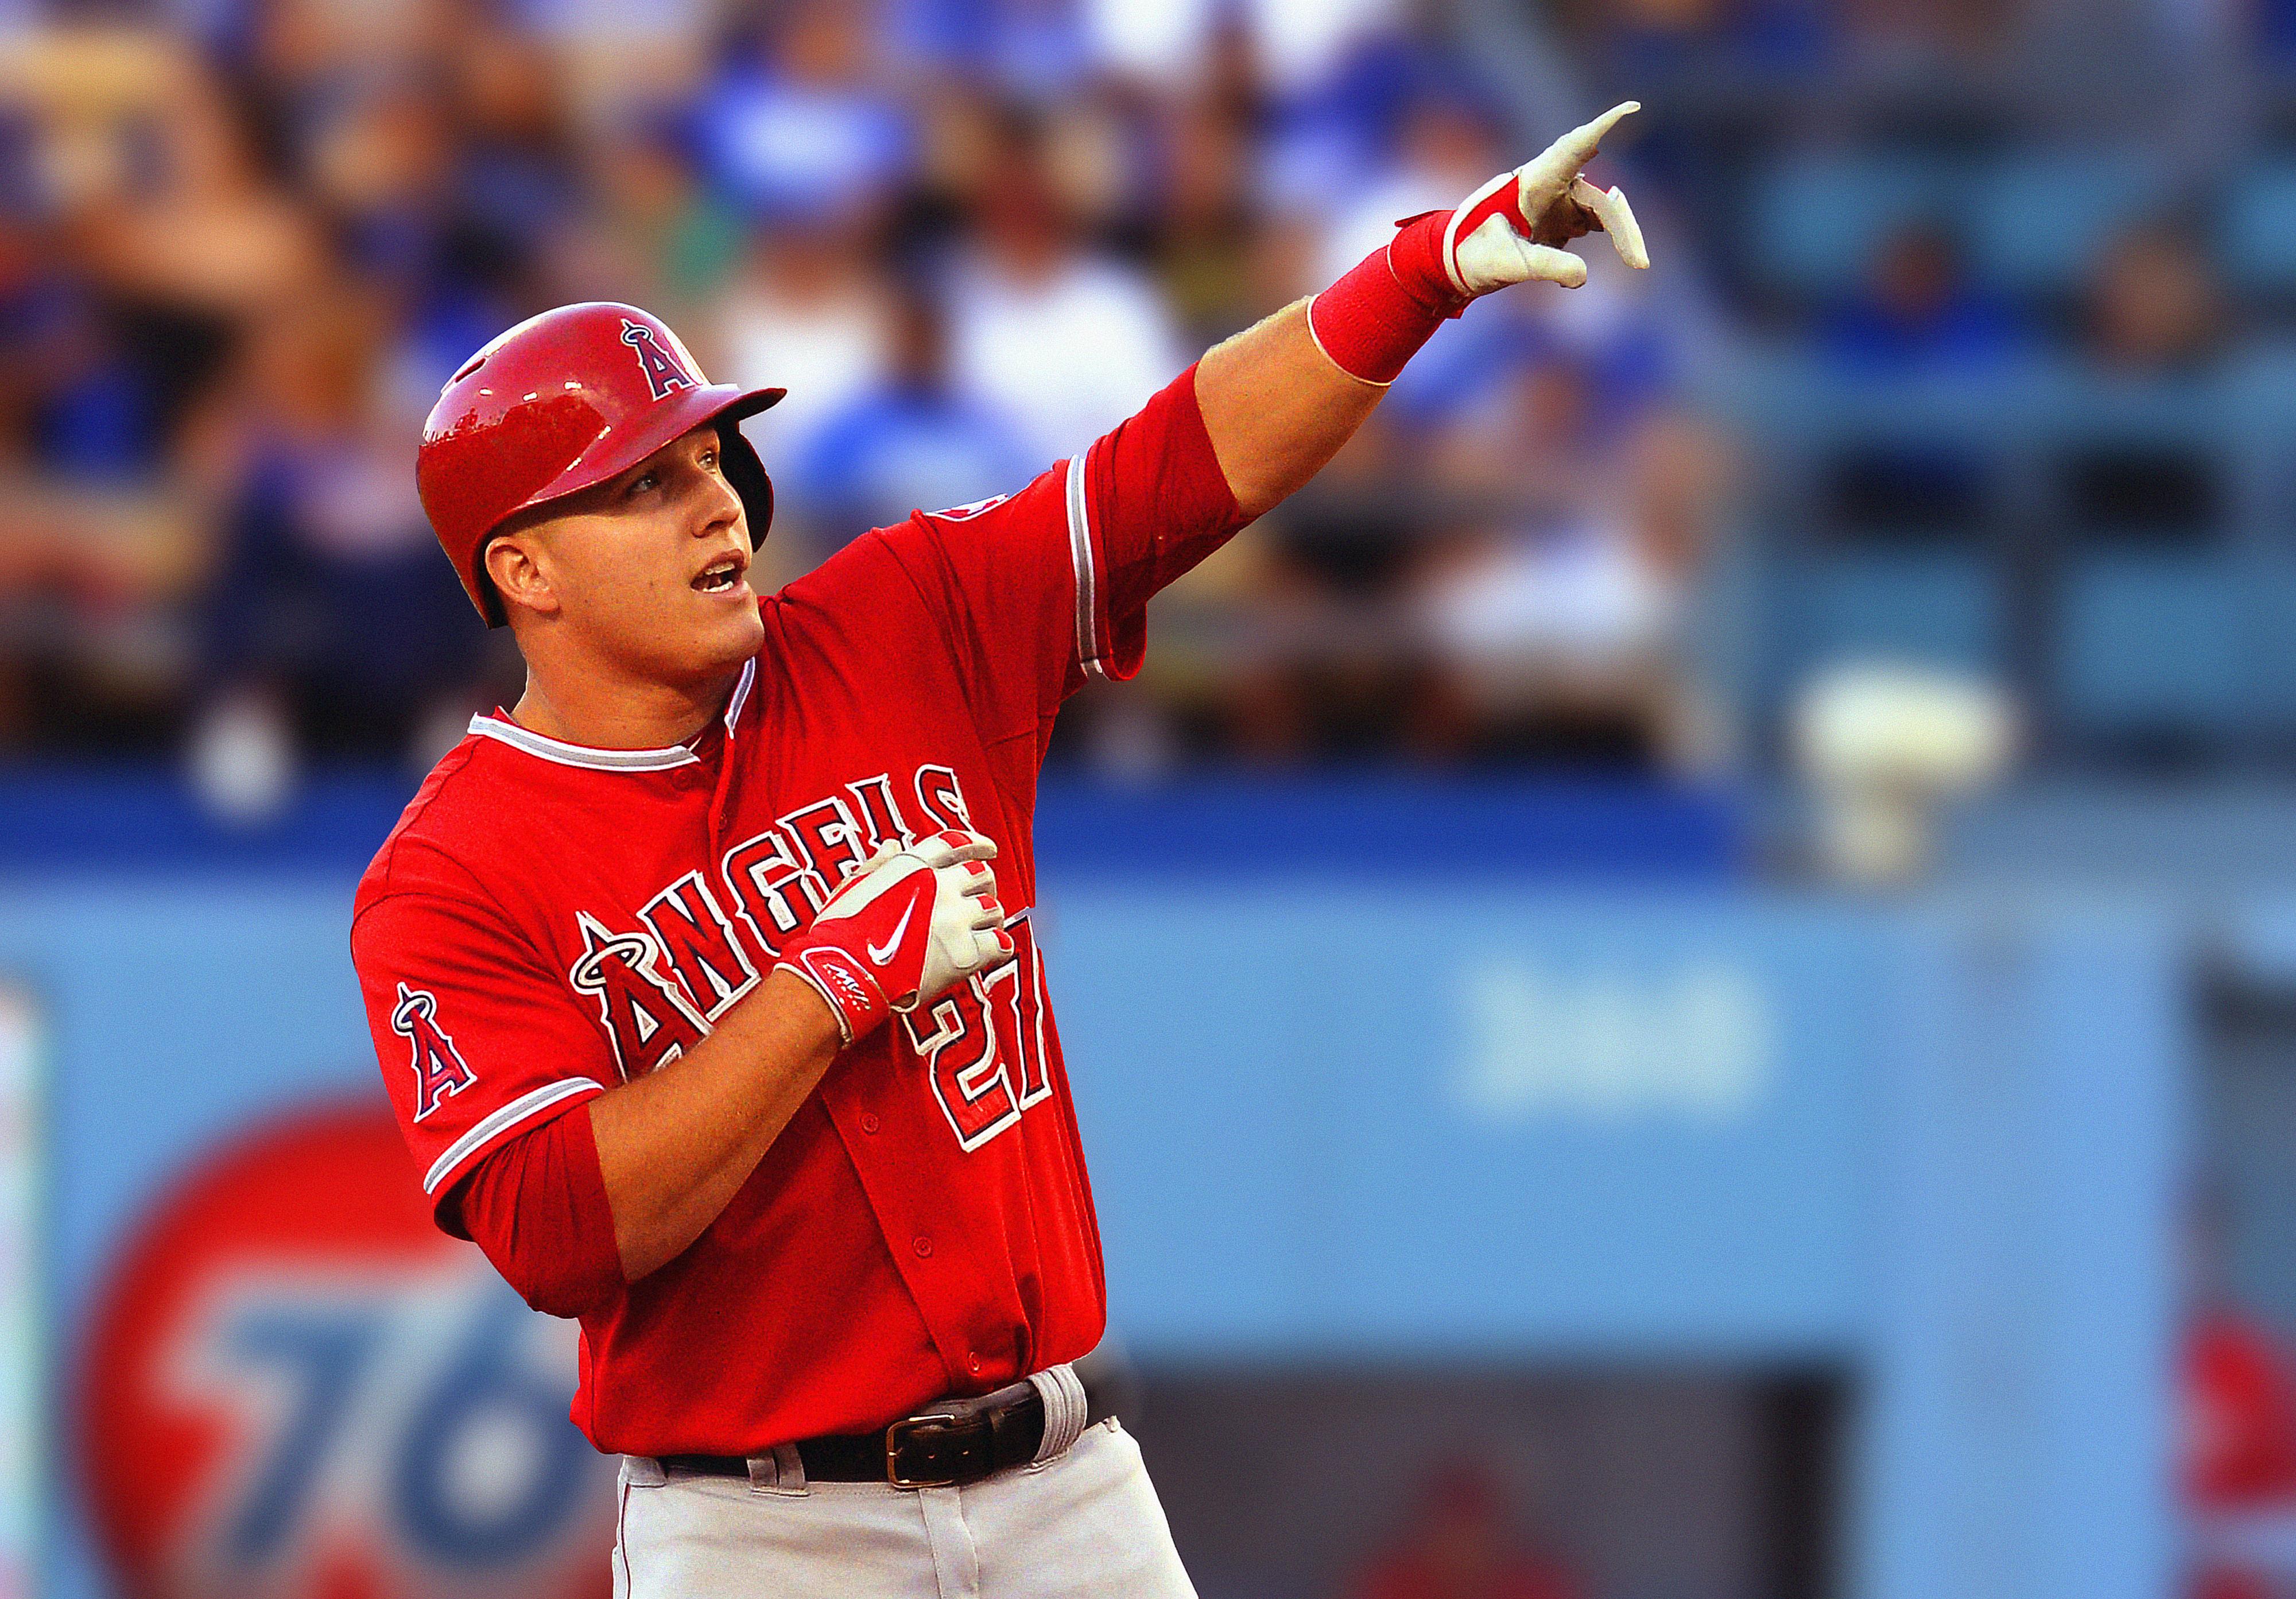 Mike Trout wallpaper by JohnnyBlaze21  Download on ZEDGE  5668